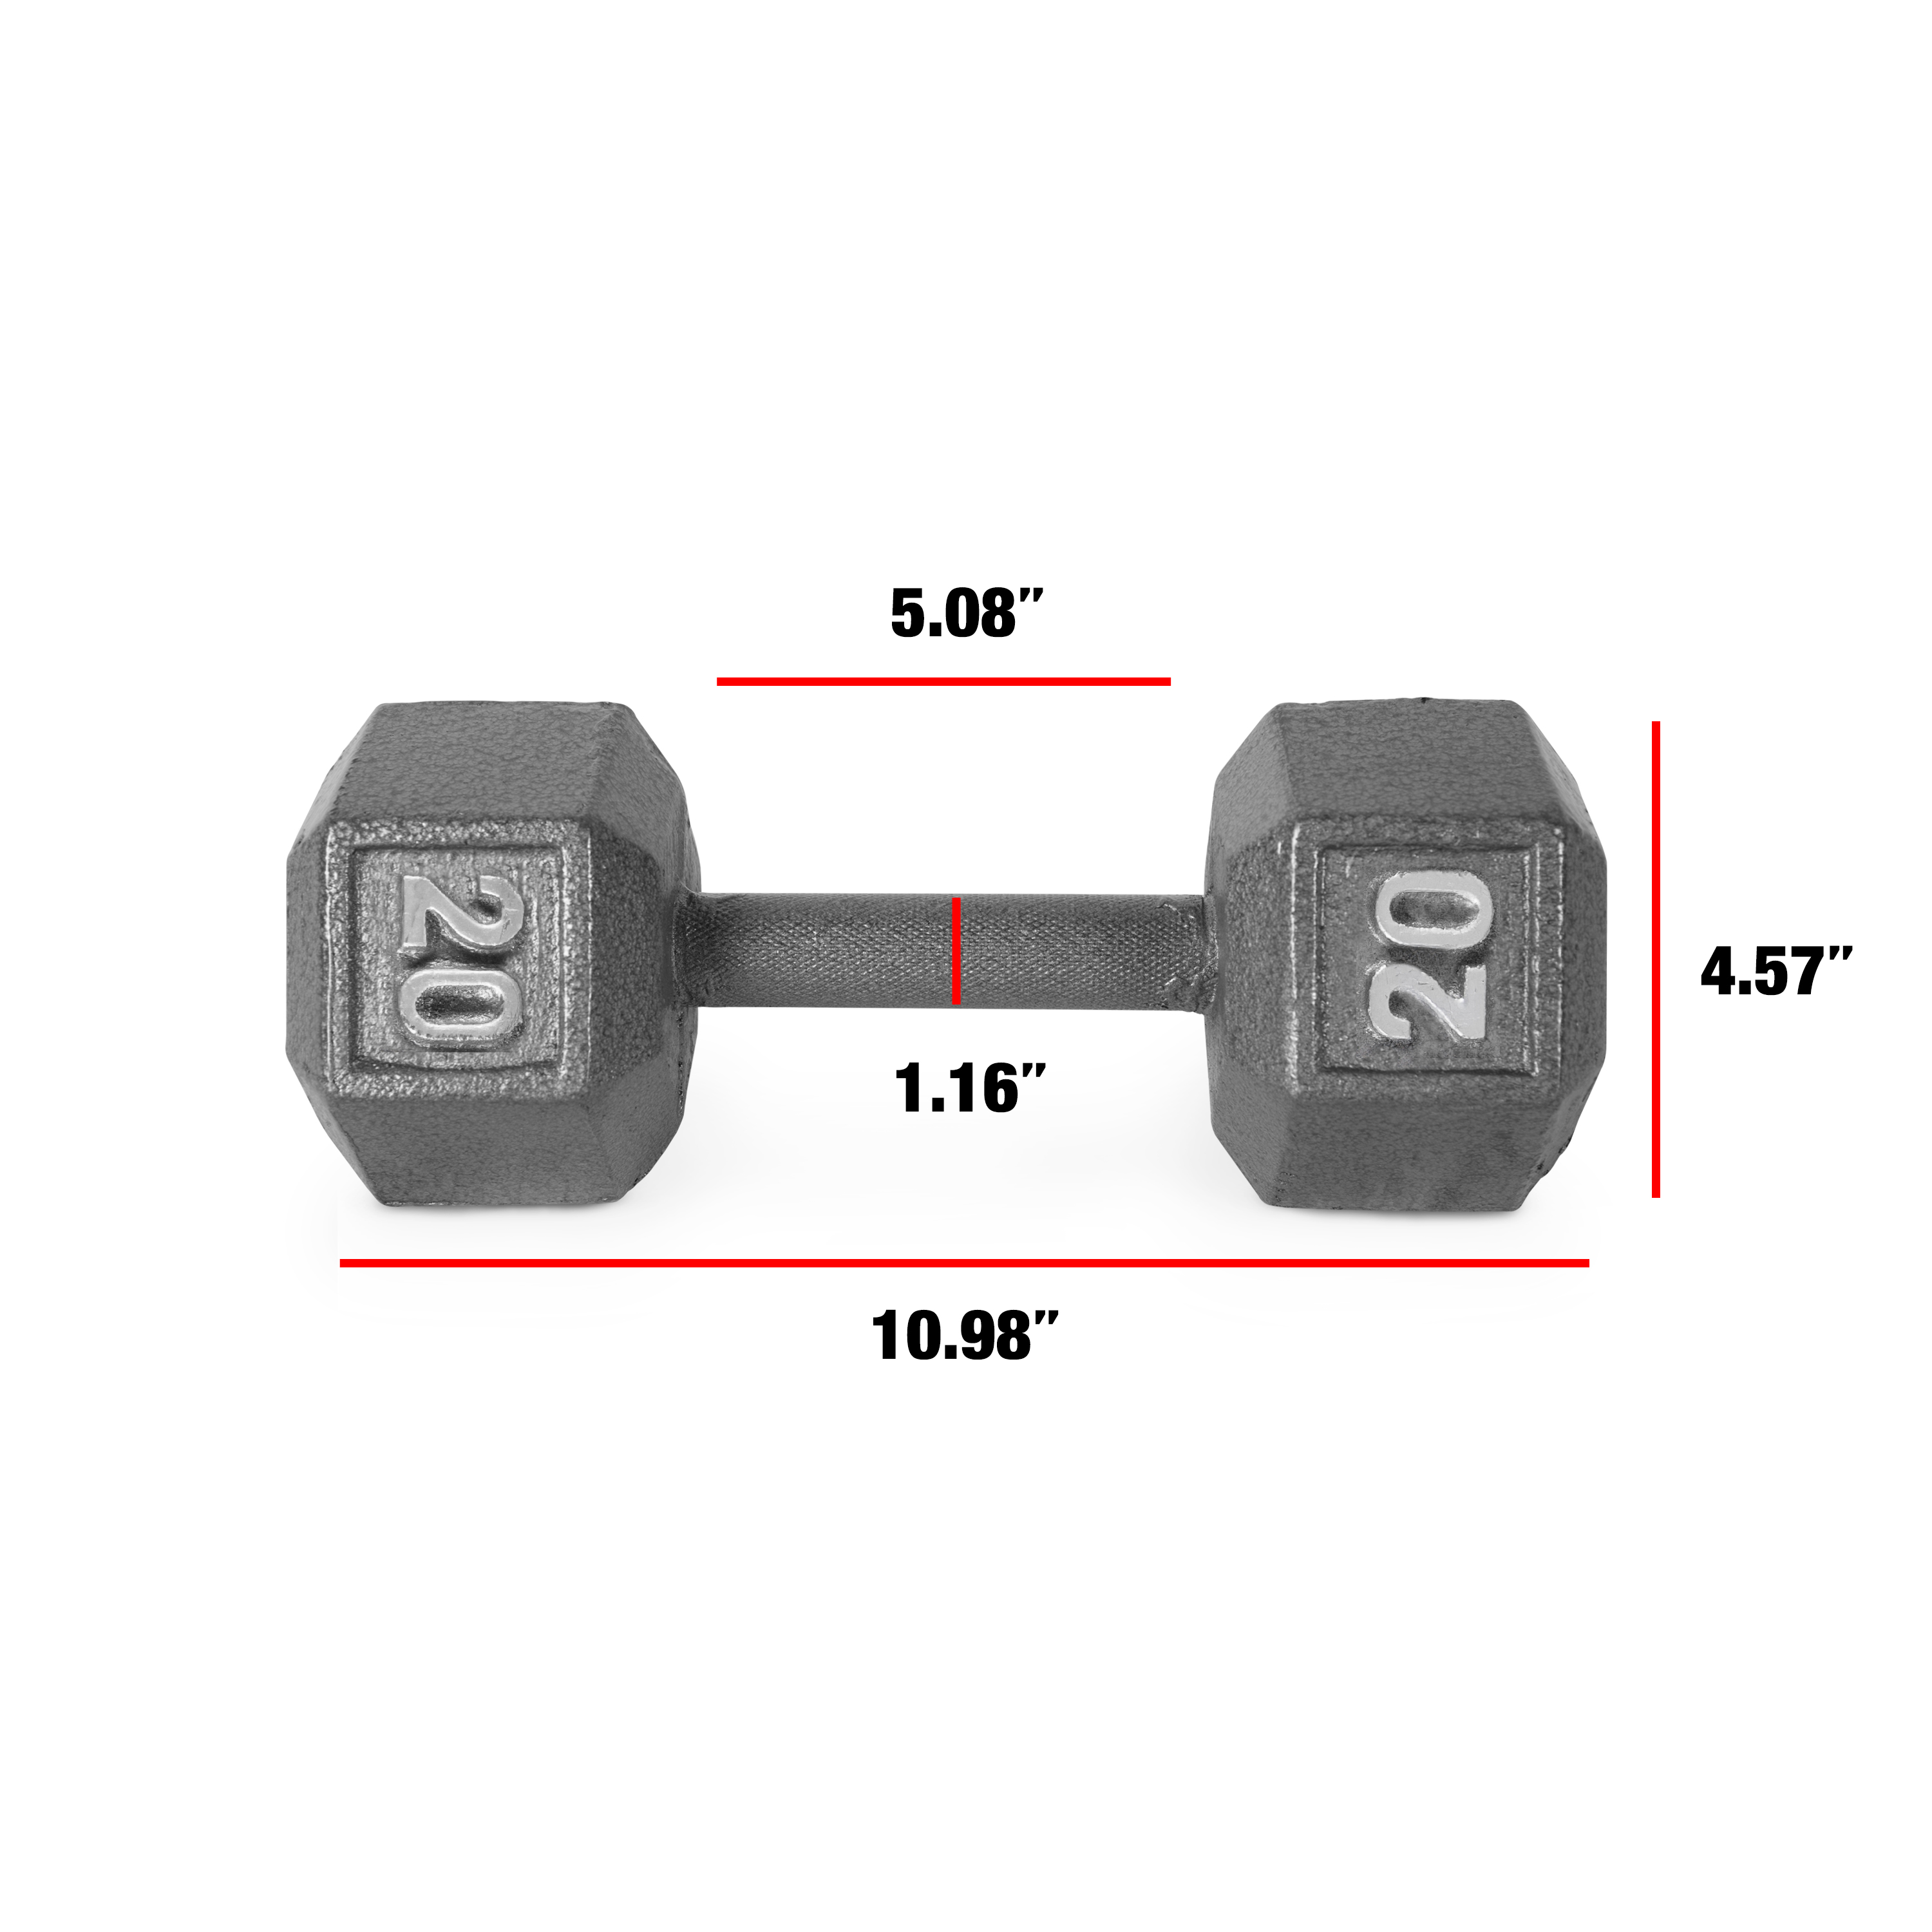 CAP Barbell 20lb Cast Iron Hex Dumbbell, Single - image 2 of 6